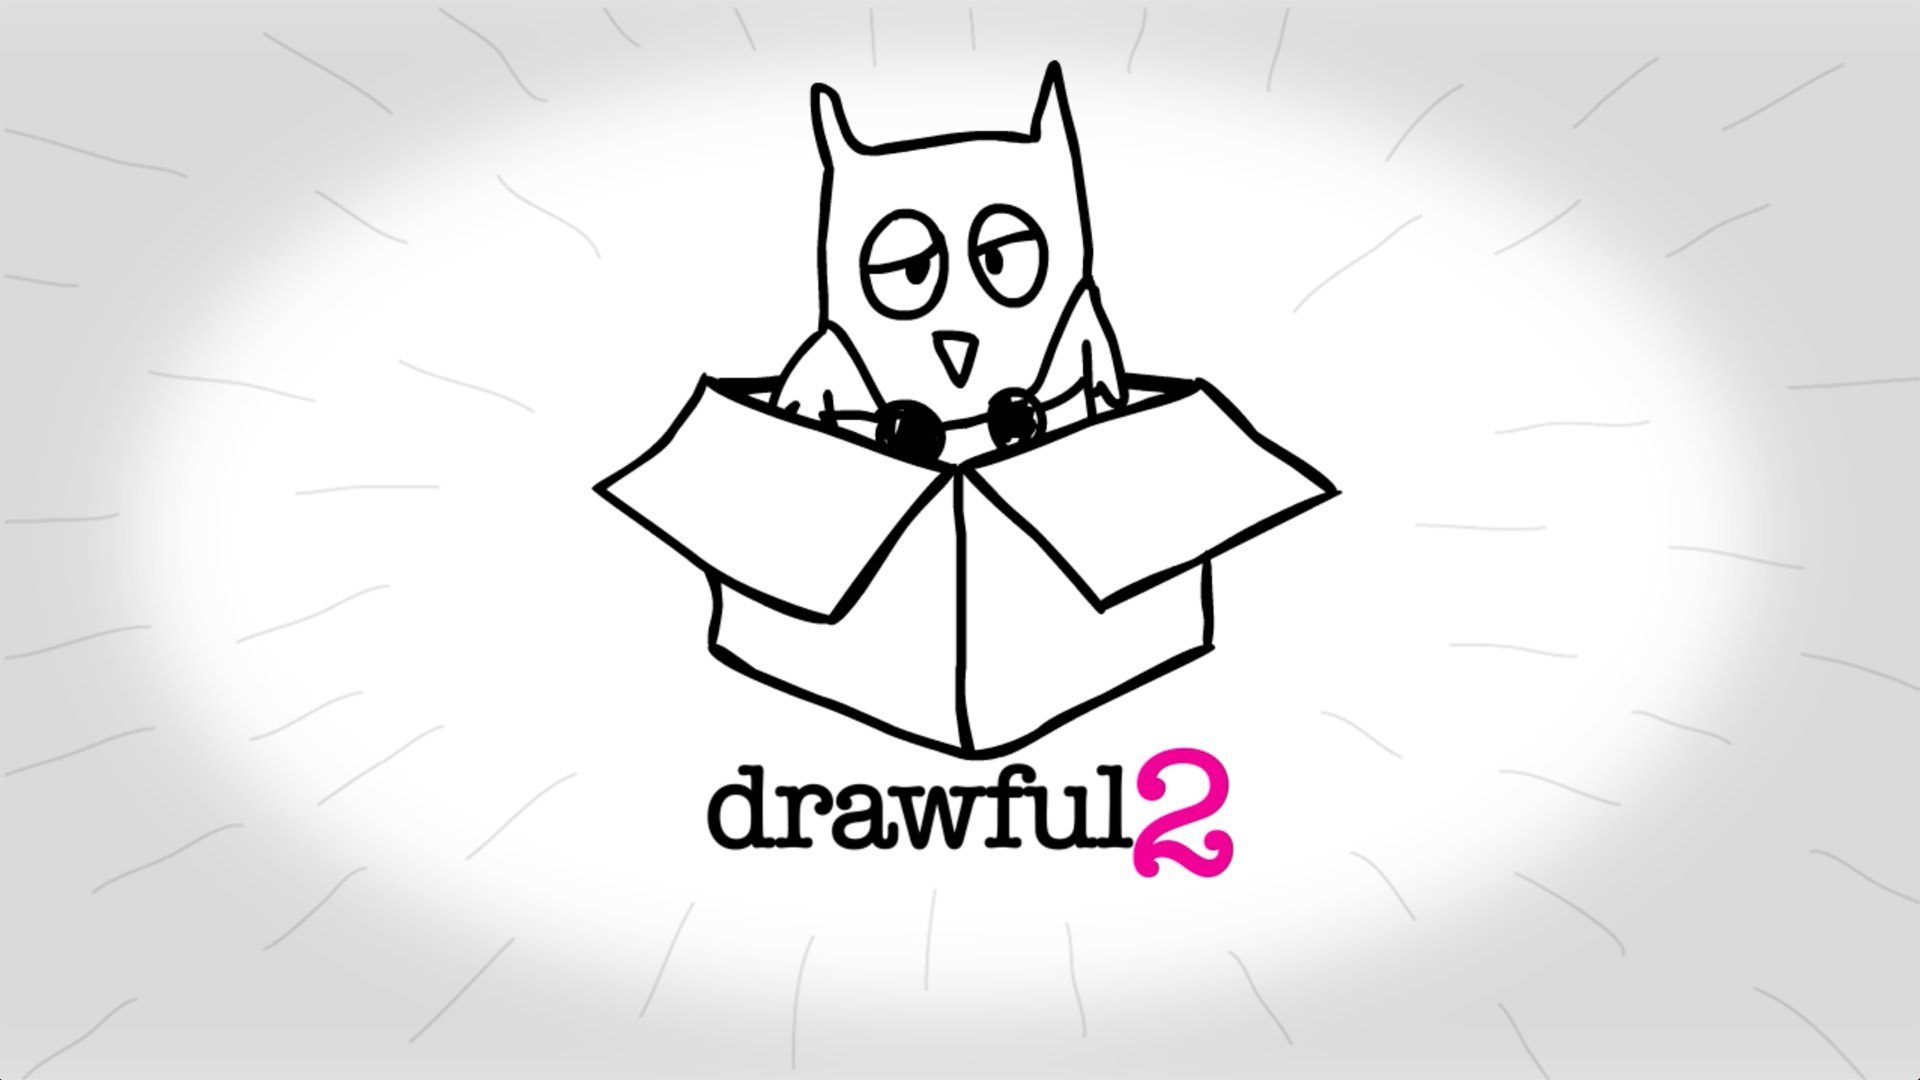 Drawful 2 will finally realize the dream of drawing with two colors at